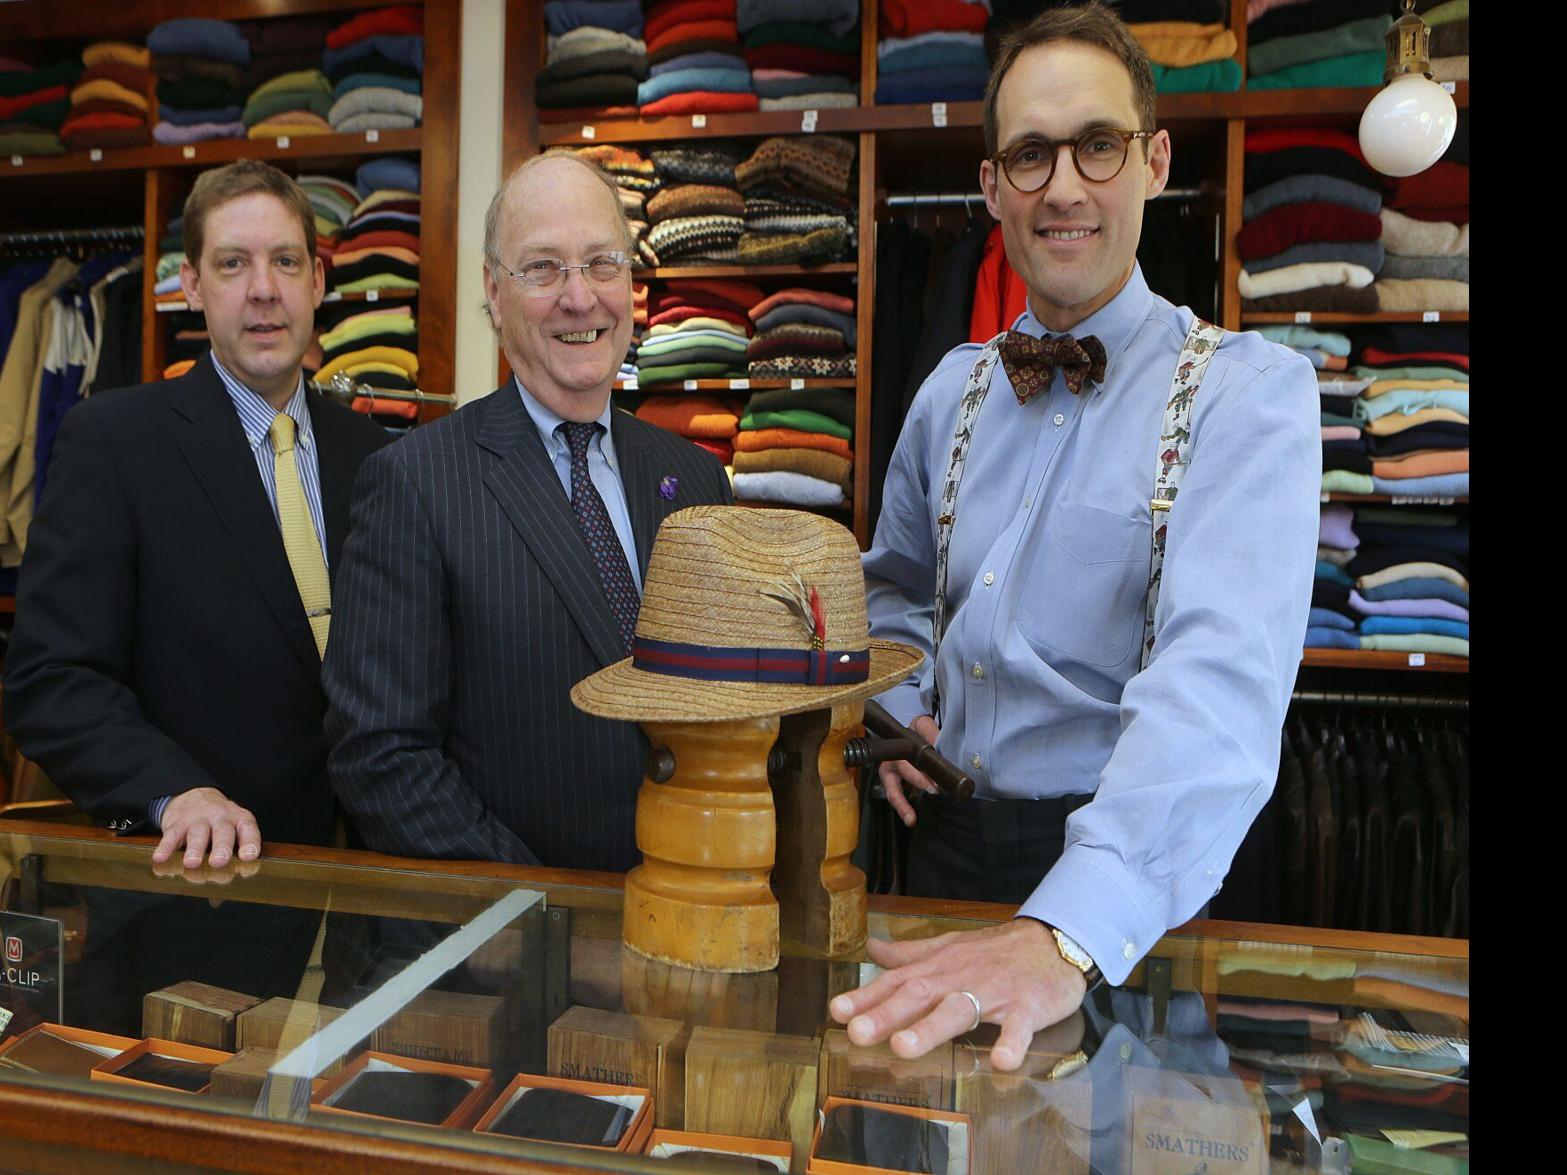 O'Connell's becomes a global purveyor of old fashion | Business Local buffalonews.com